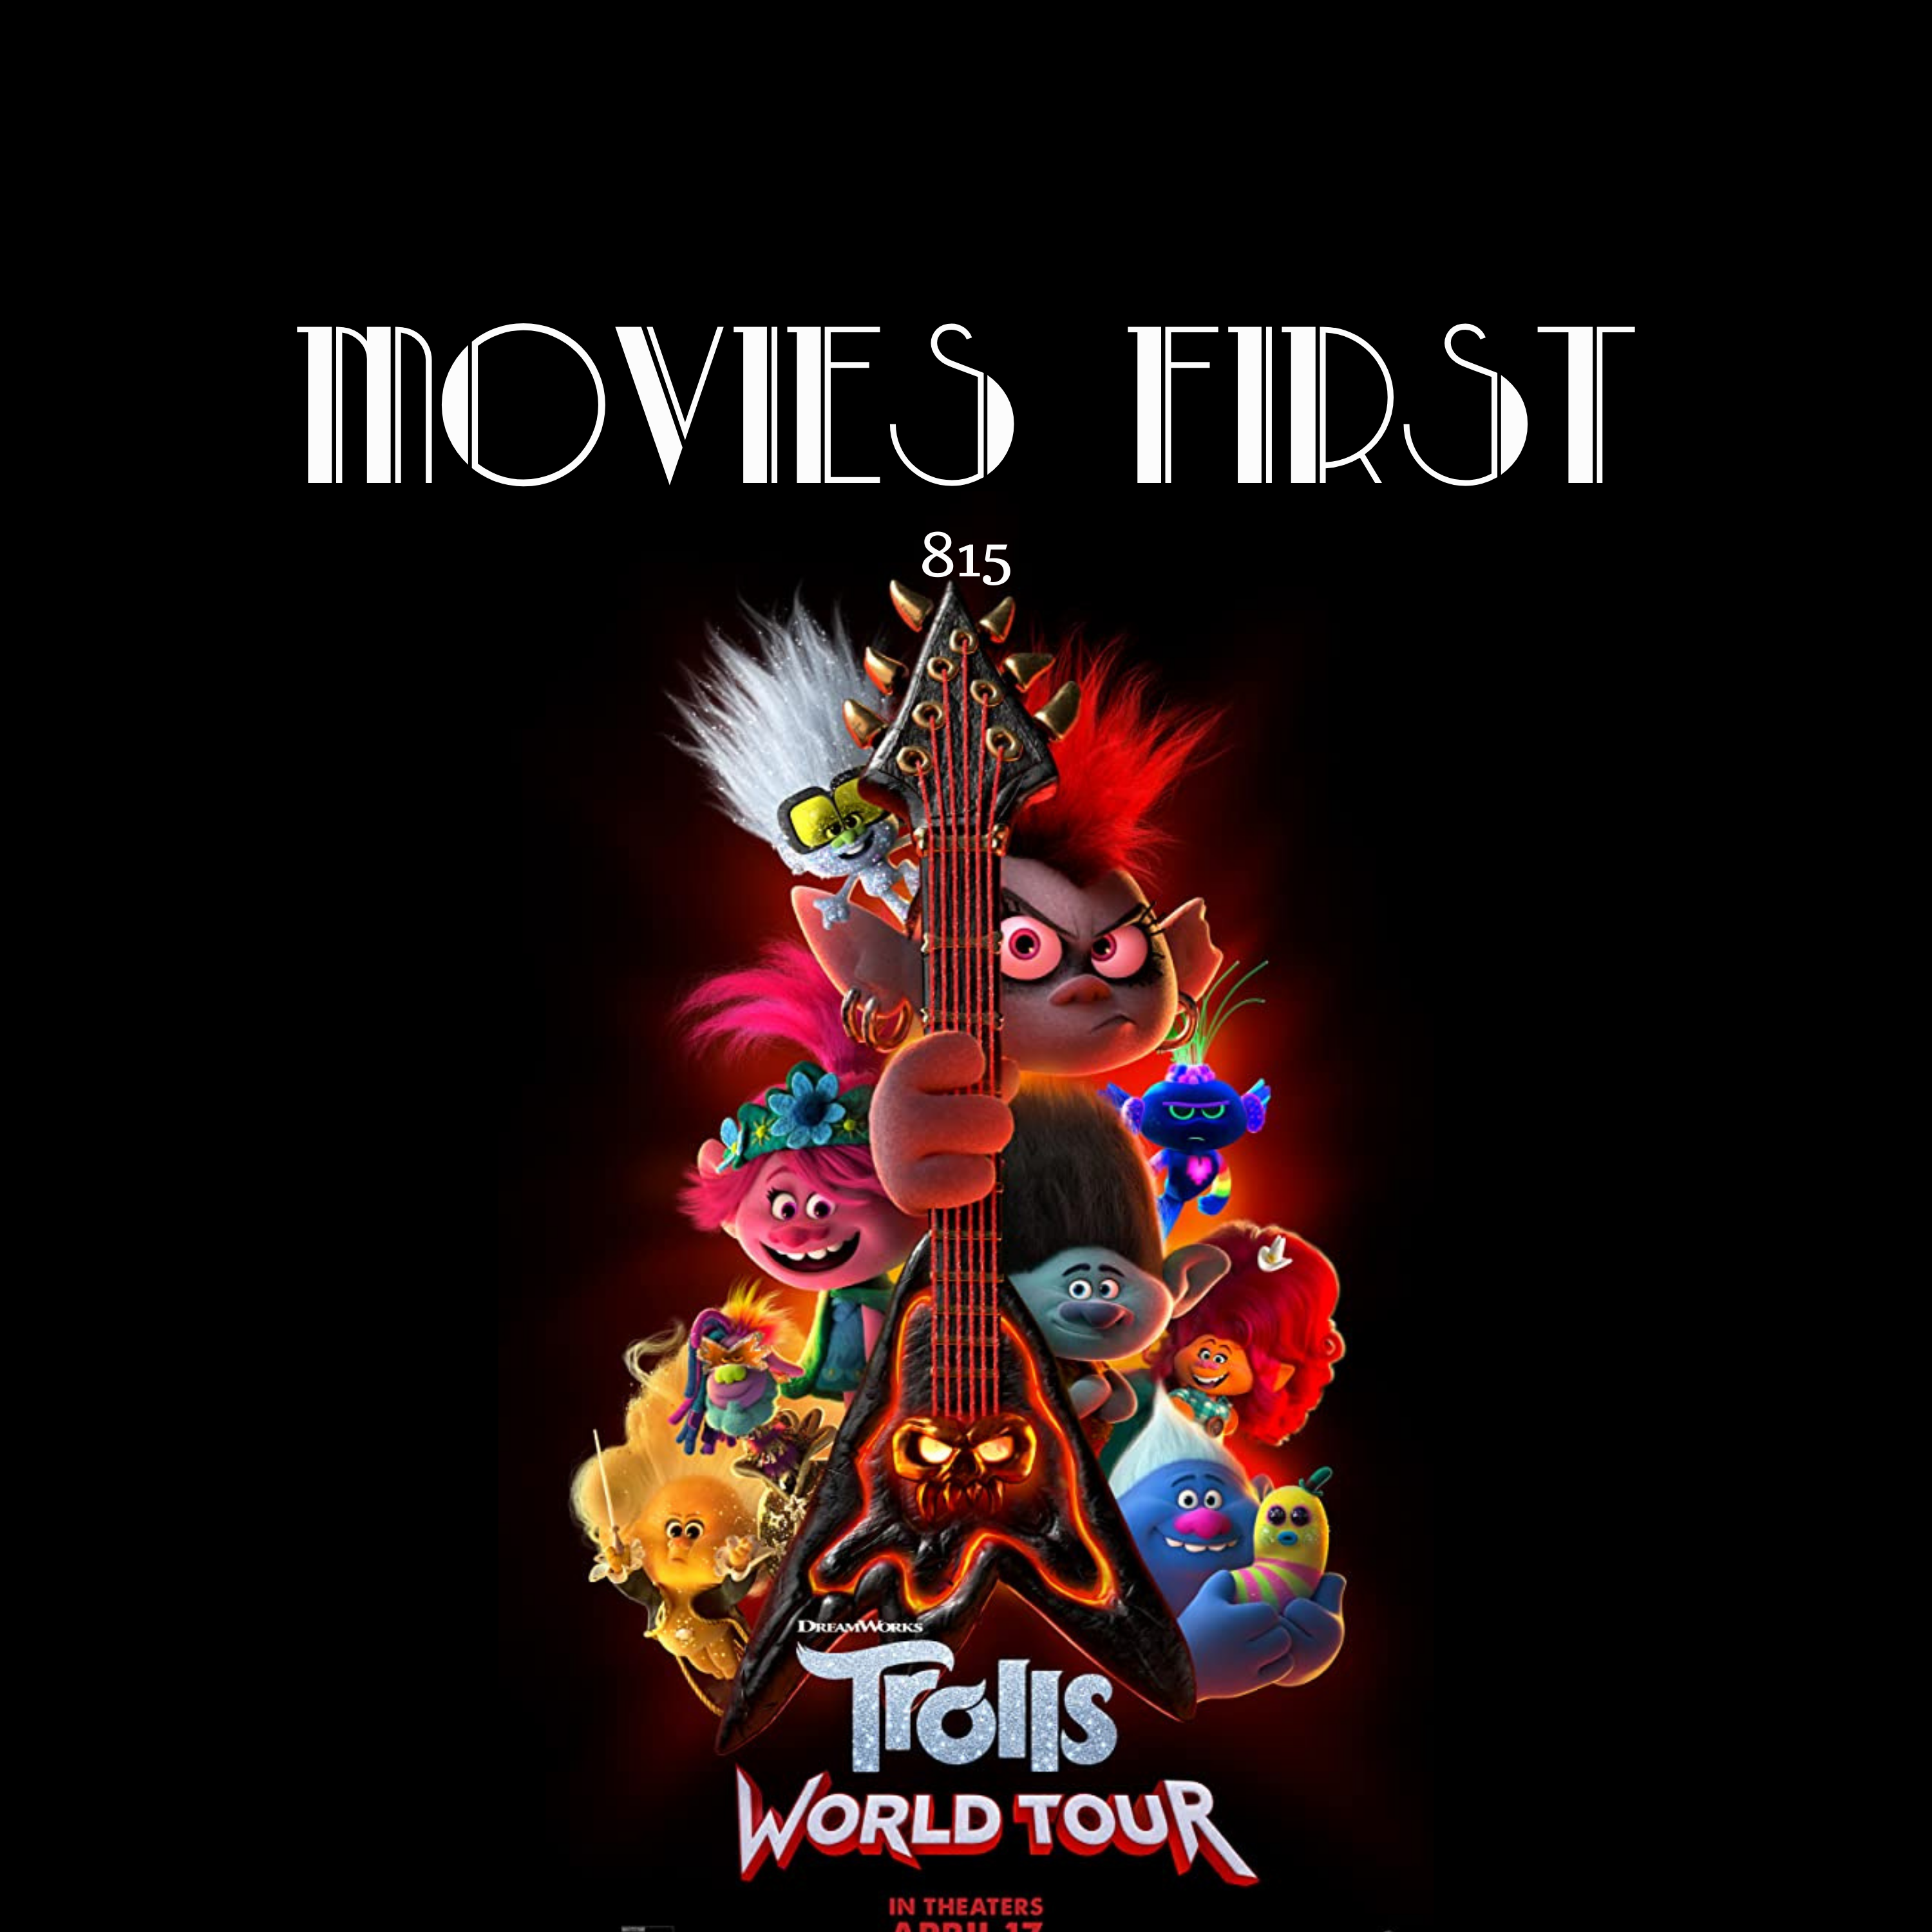 Trolls World Tour (Animation, Adventure, Comedy) (the @MoviesFirst review)